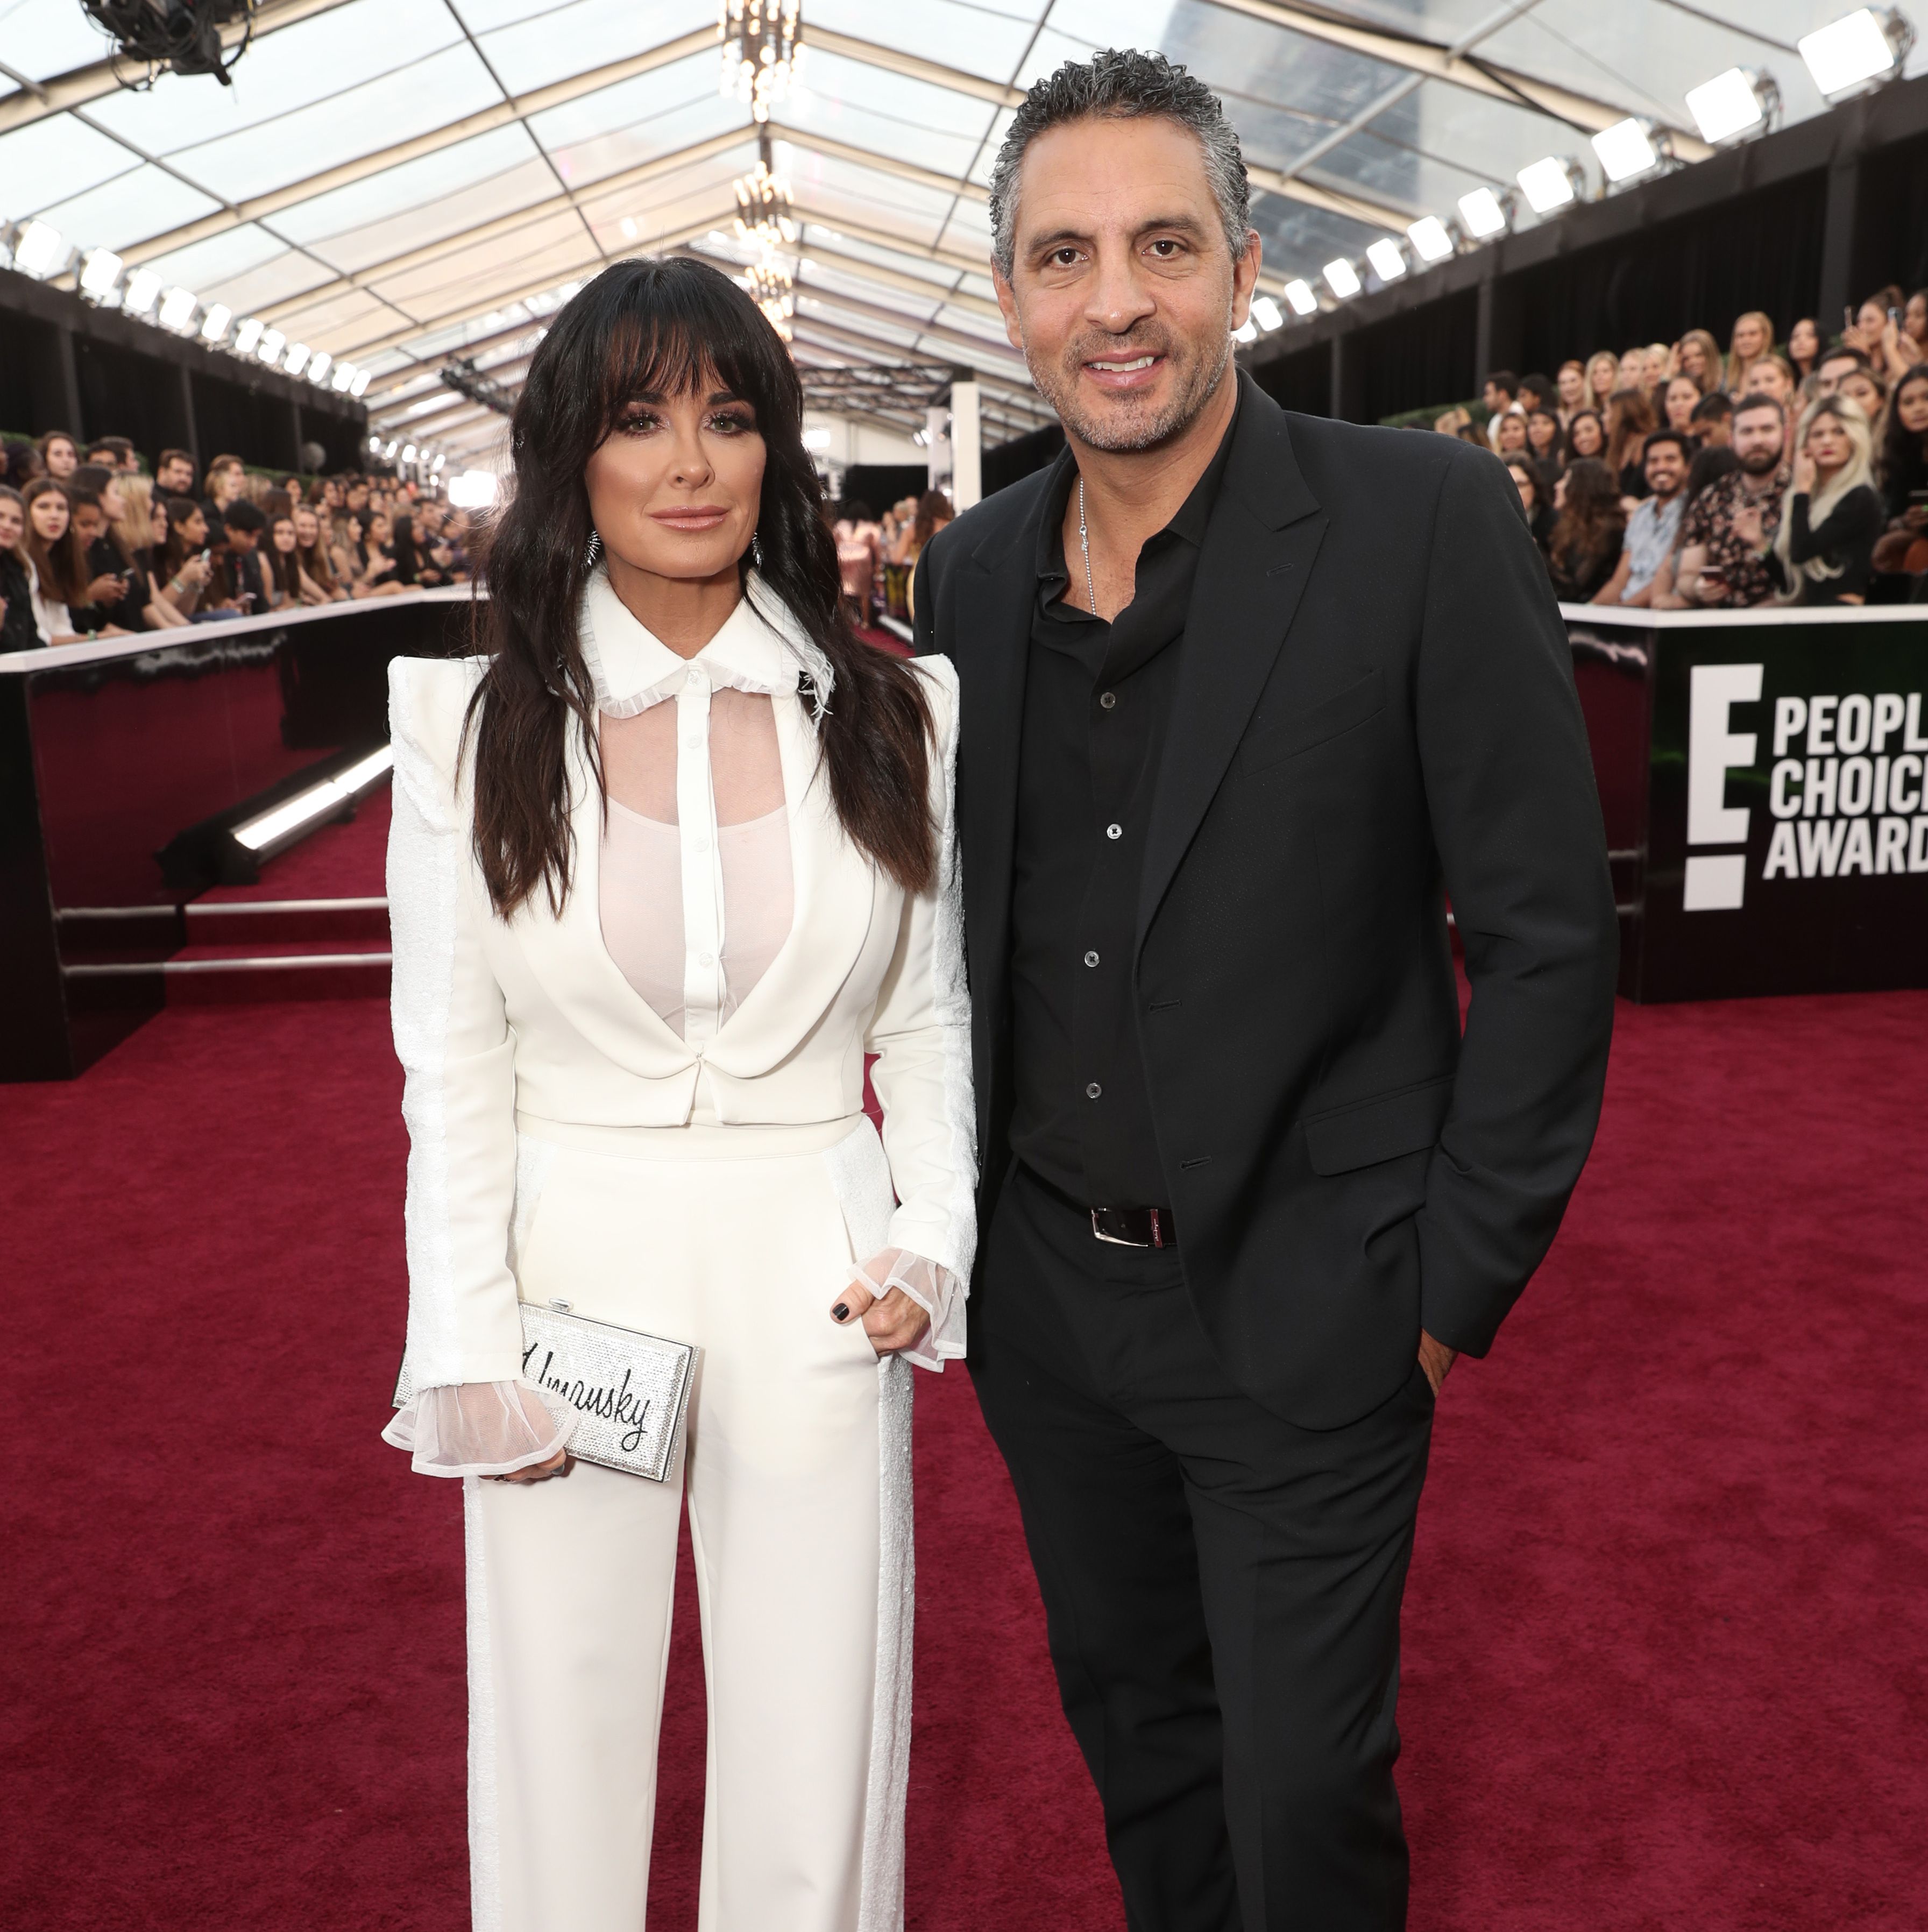 Kyle Richards and Mauricio Umansky Release Statement on the State of Their Relationship